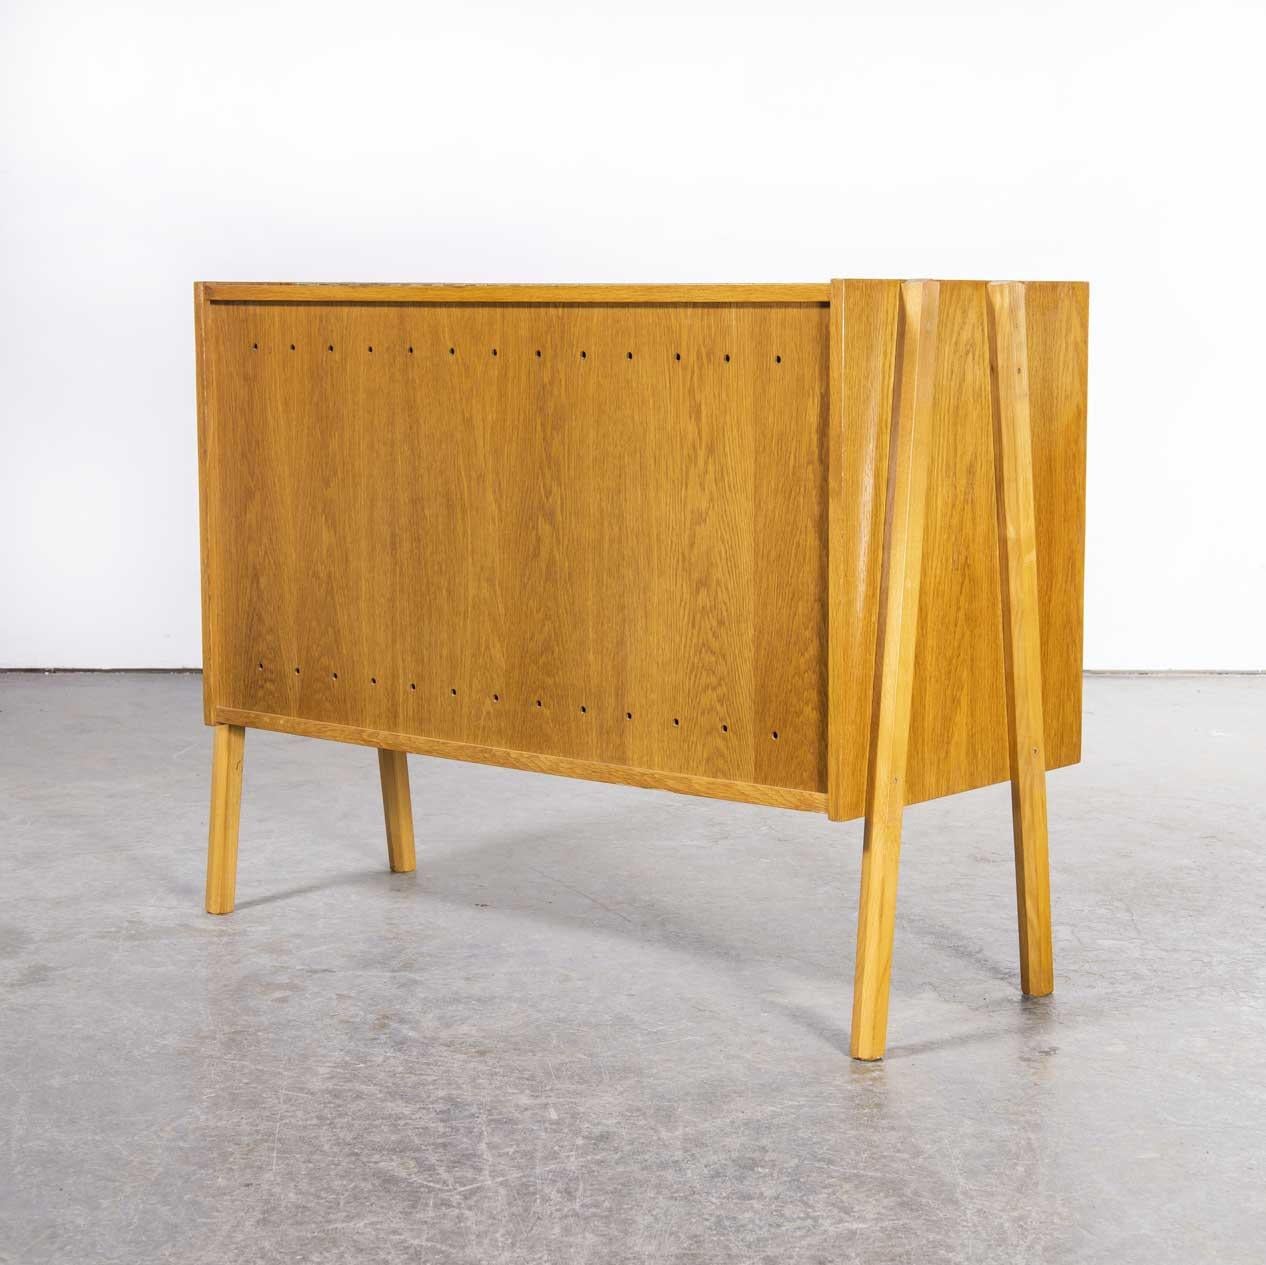 1950’s original oak blanket box – small cabinet by Tatra Pravenec
1950’s original oak blanket box – small cabinet by Tatra Pravenec. Produced by Tatra Pravenec in the Czech Republic. Czech design will always be affiliated to the Bauhaus movement